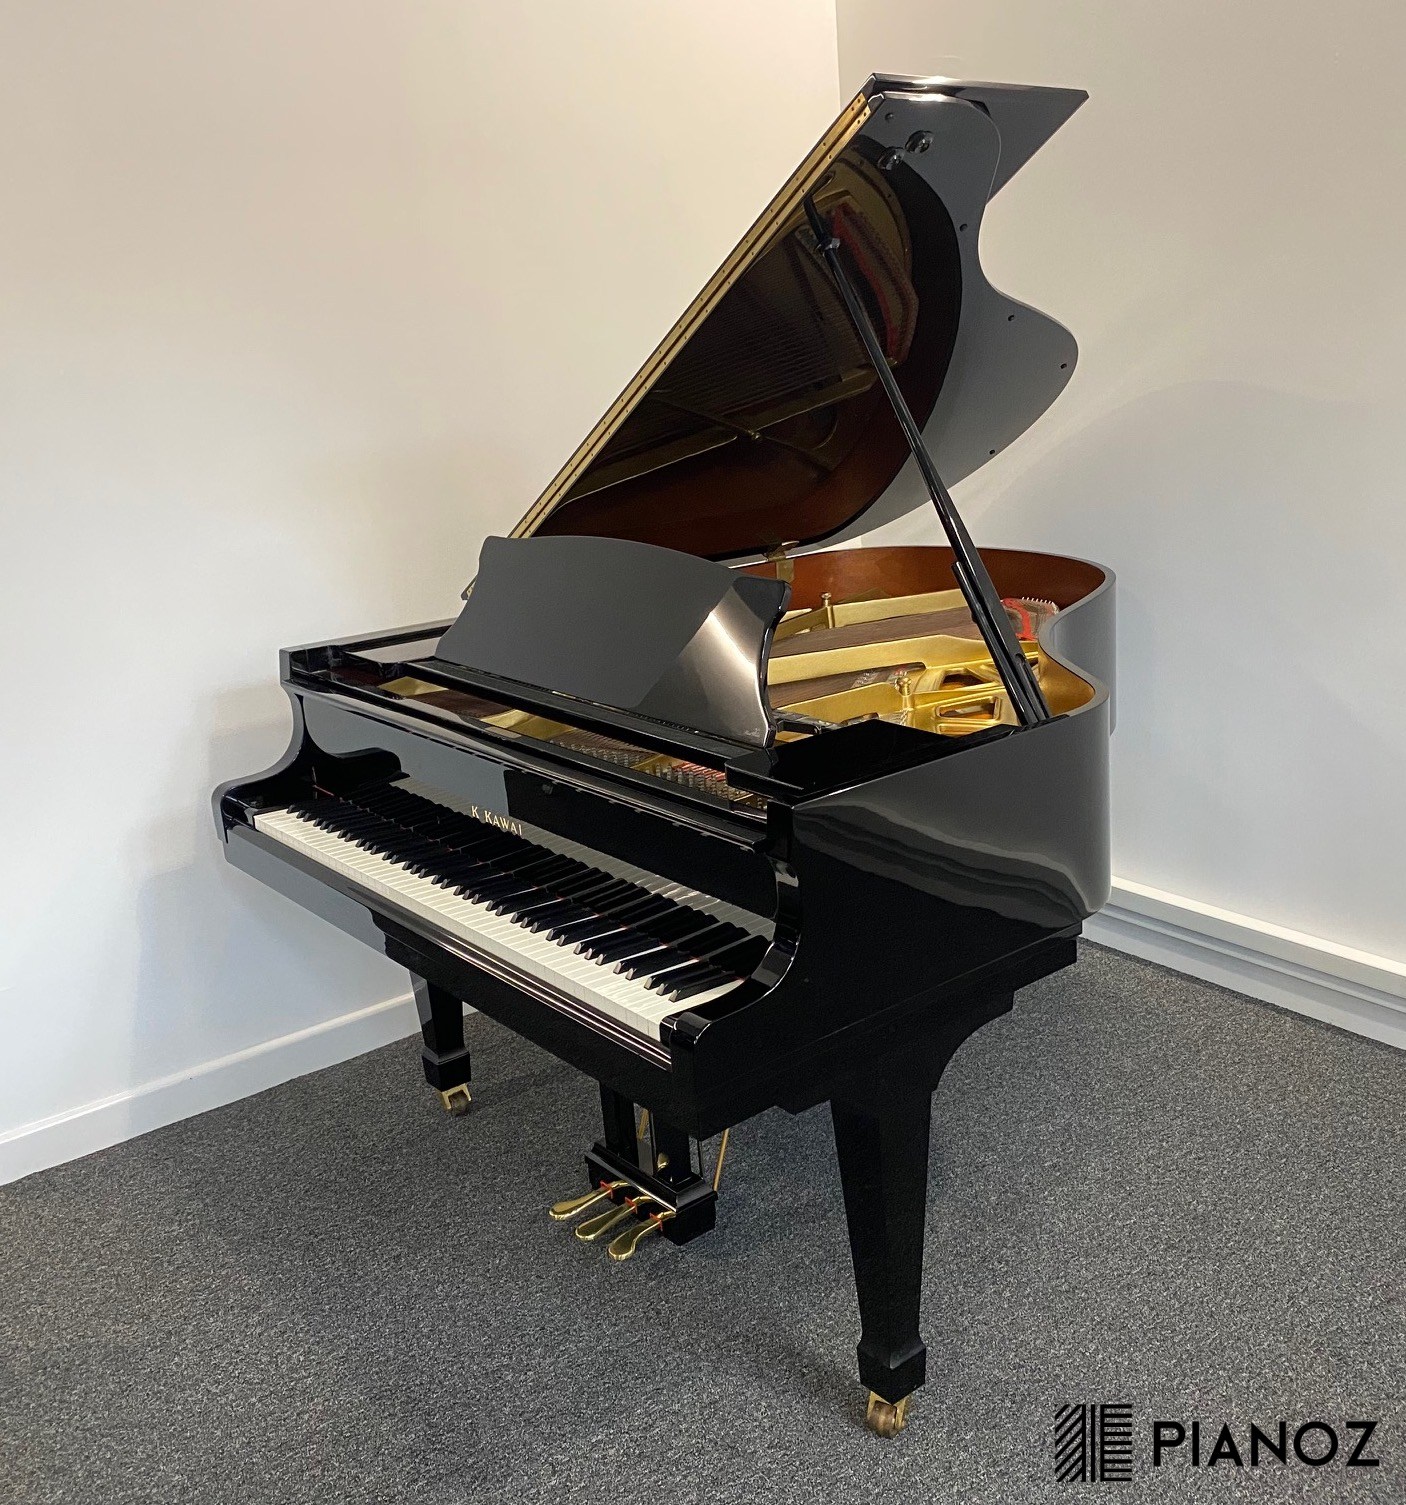 Kawai RX-2 Japanese Grand Piano piano for sale in UK